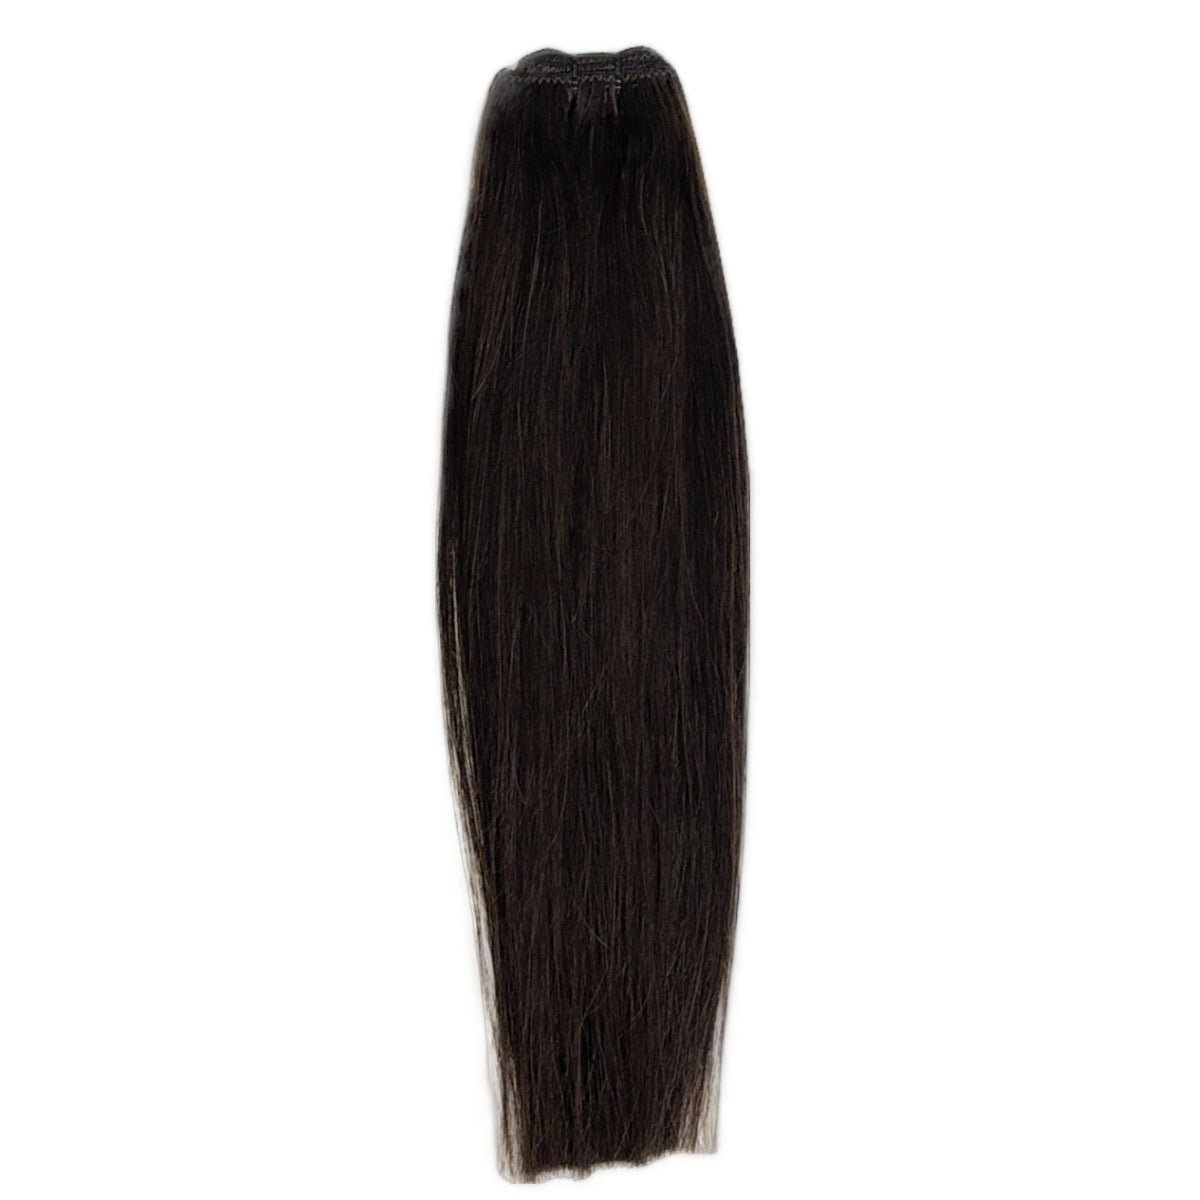 Euro Weave Weft 16 inch Human Hair Extensions - Seamless, Soft, & Shiny - beautyhair.co.uk